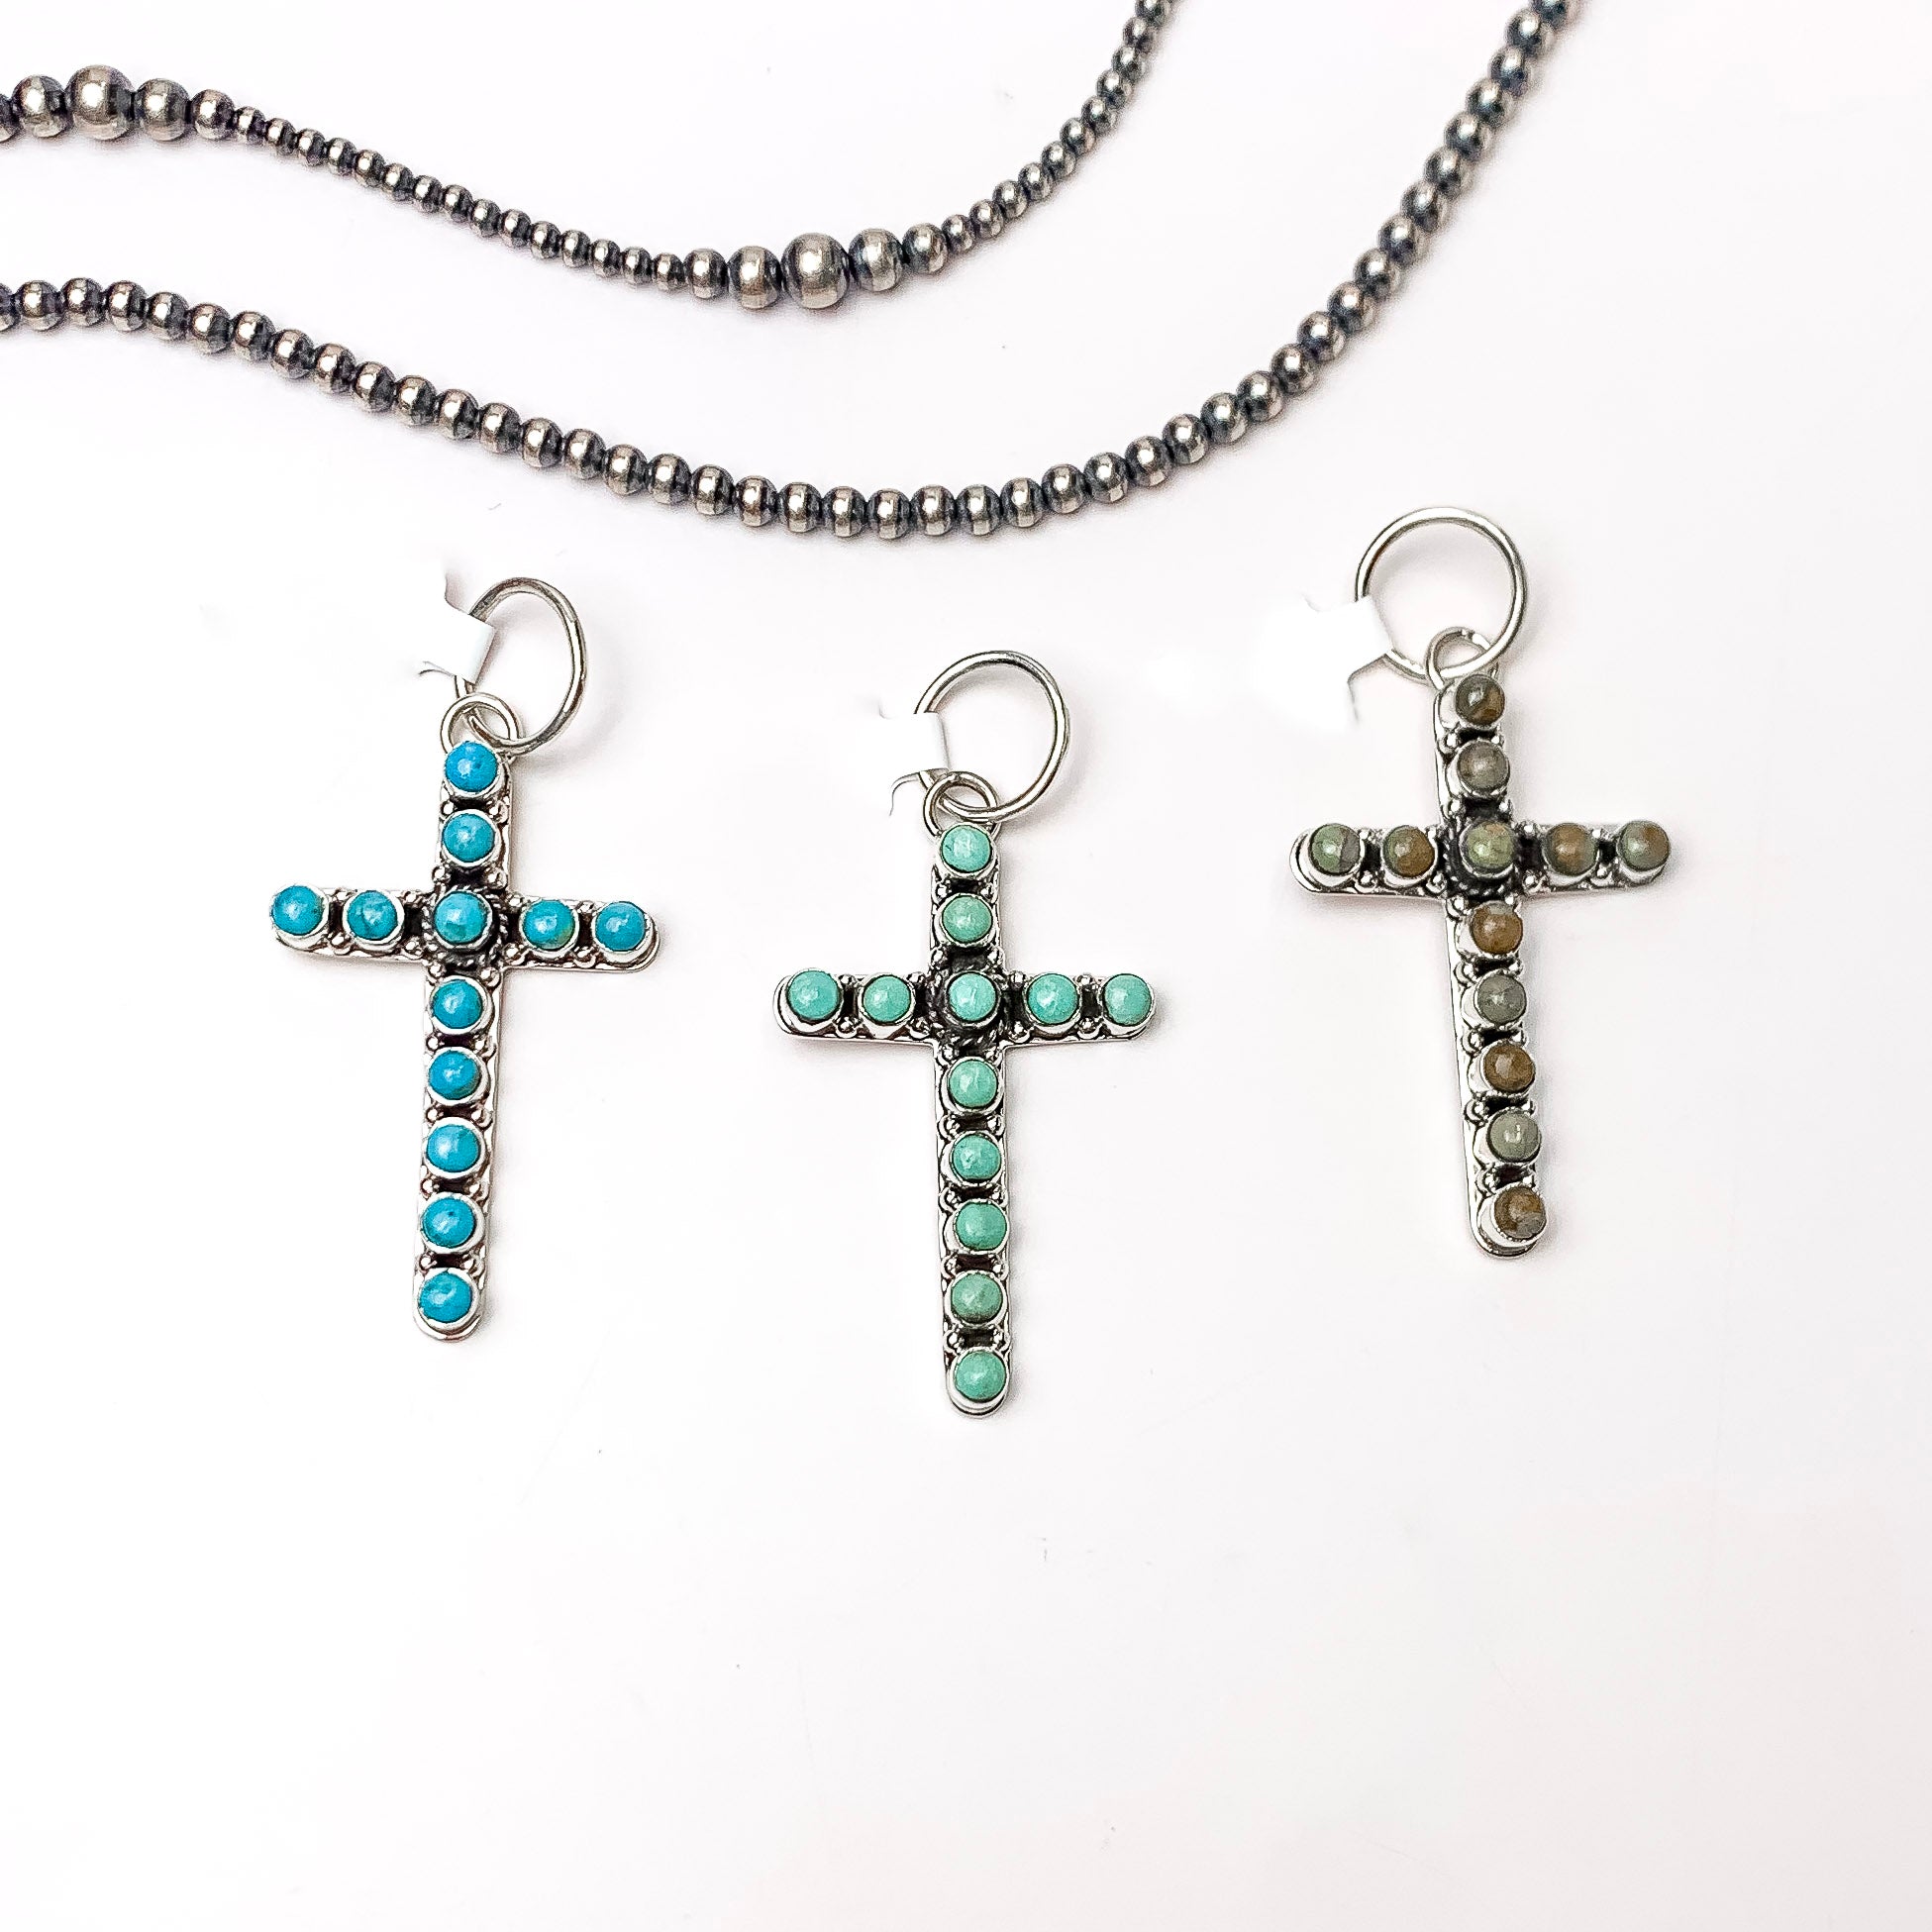 In the picture sterling silver and kingman turquoise small cross pendant with a white background